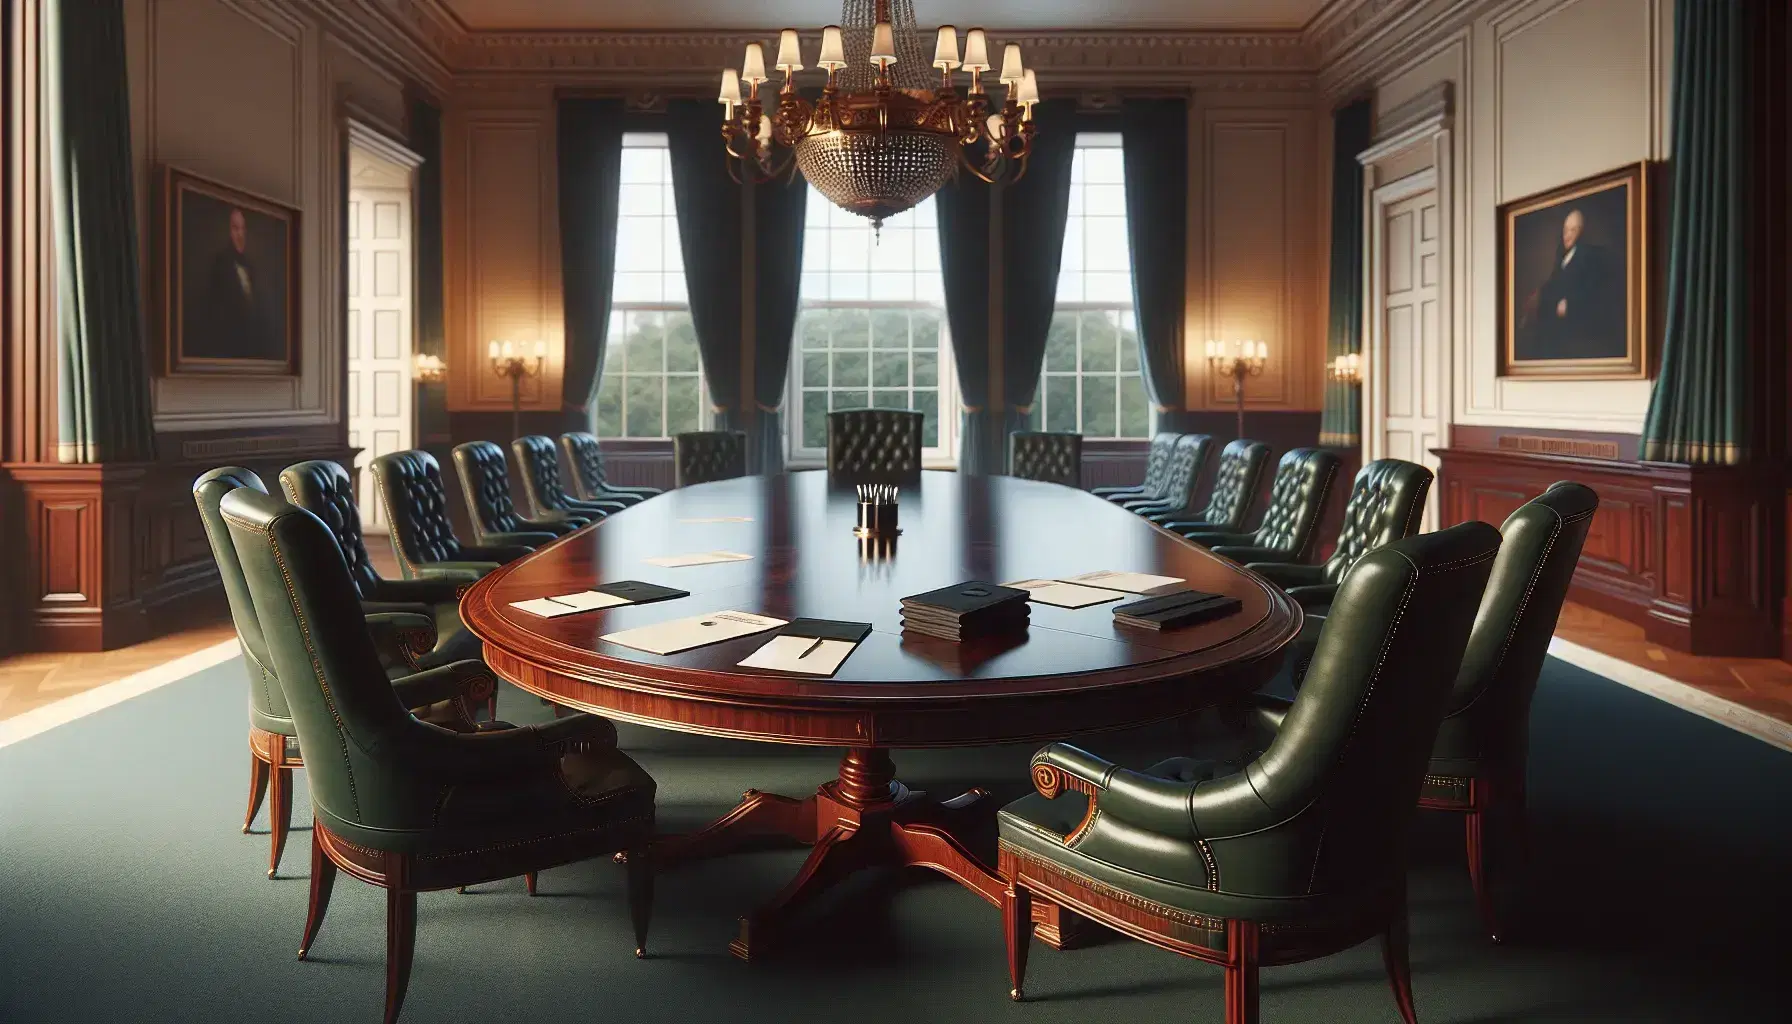 Elegant mahogany meeting table with high-backed green leather chairs, brass detailing, white paper stacks, and pens in a well-lit room with green drapes.